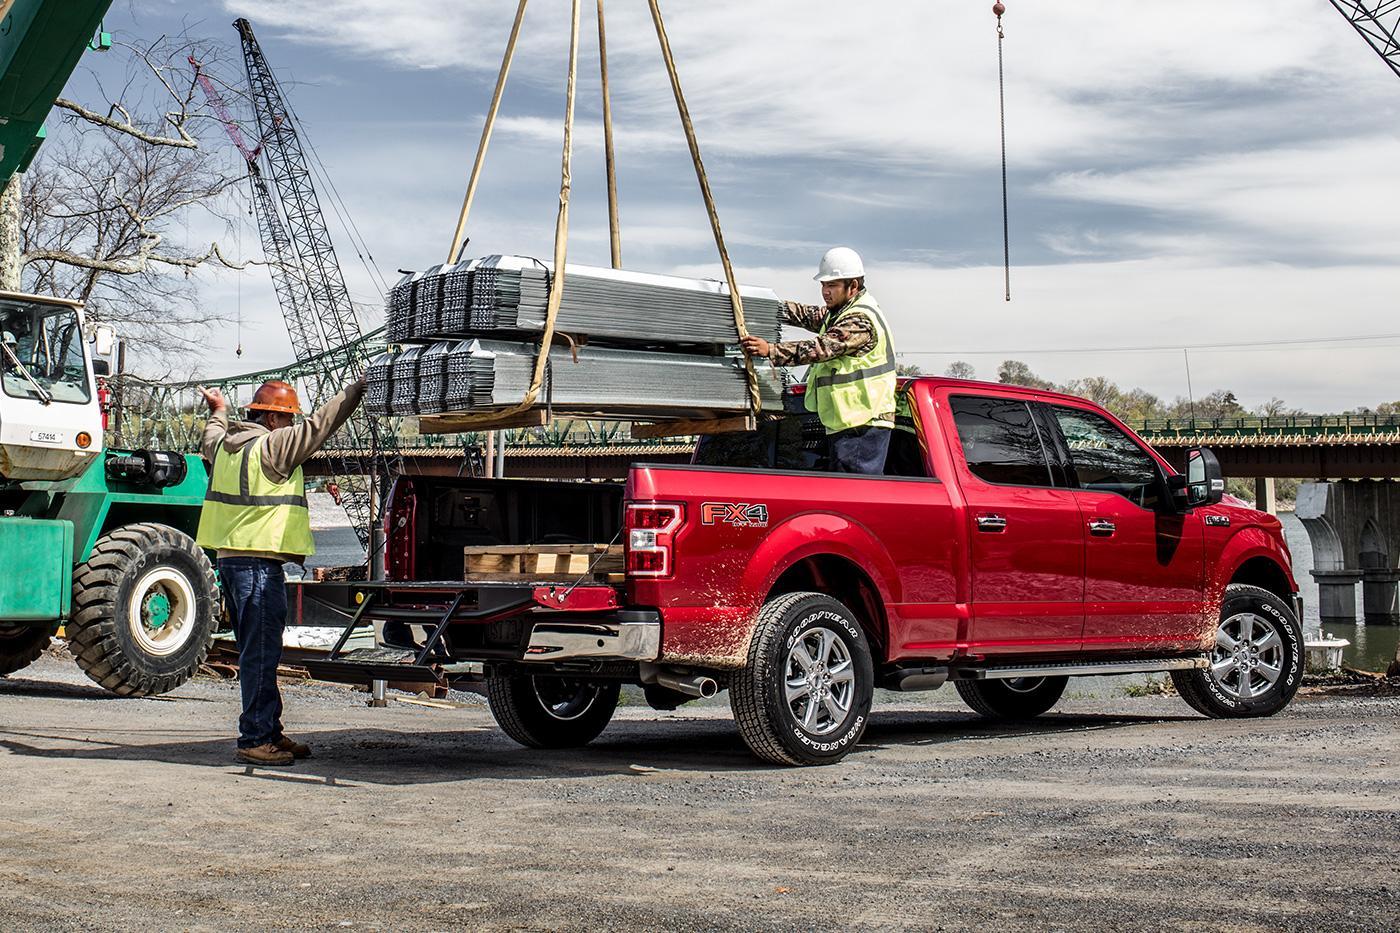  Ford 2019 F-150 image